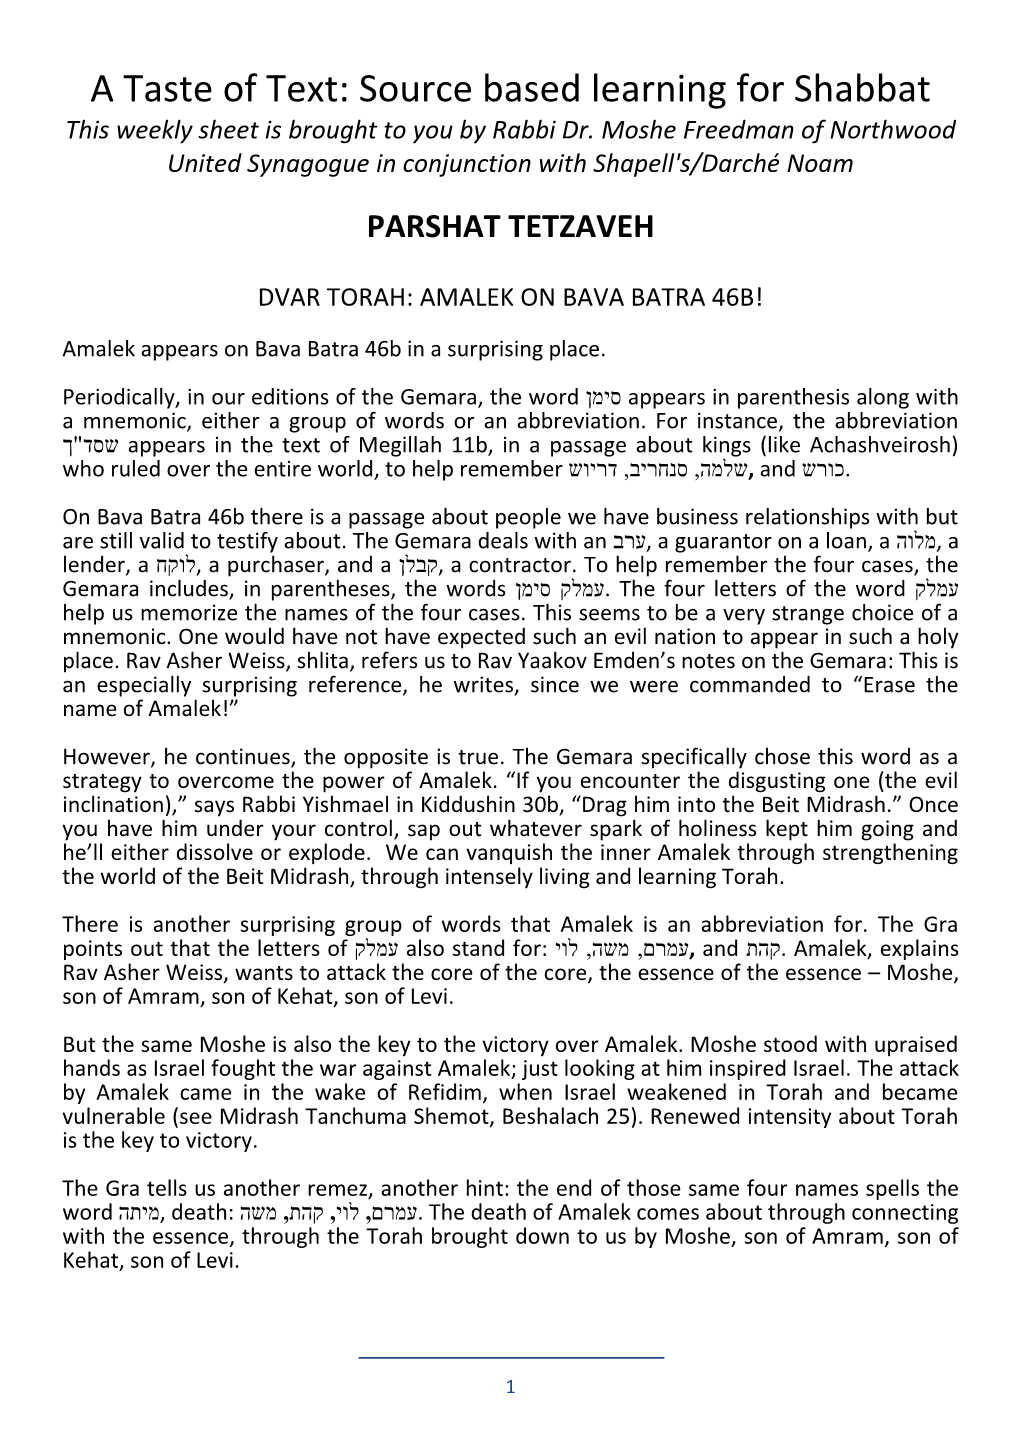 A Taste of Text: Source Based Learning for Shabbat This Weekly Sheet Is Brought to You by Rabbi Dr